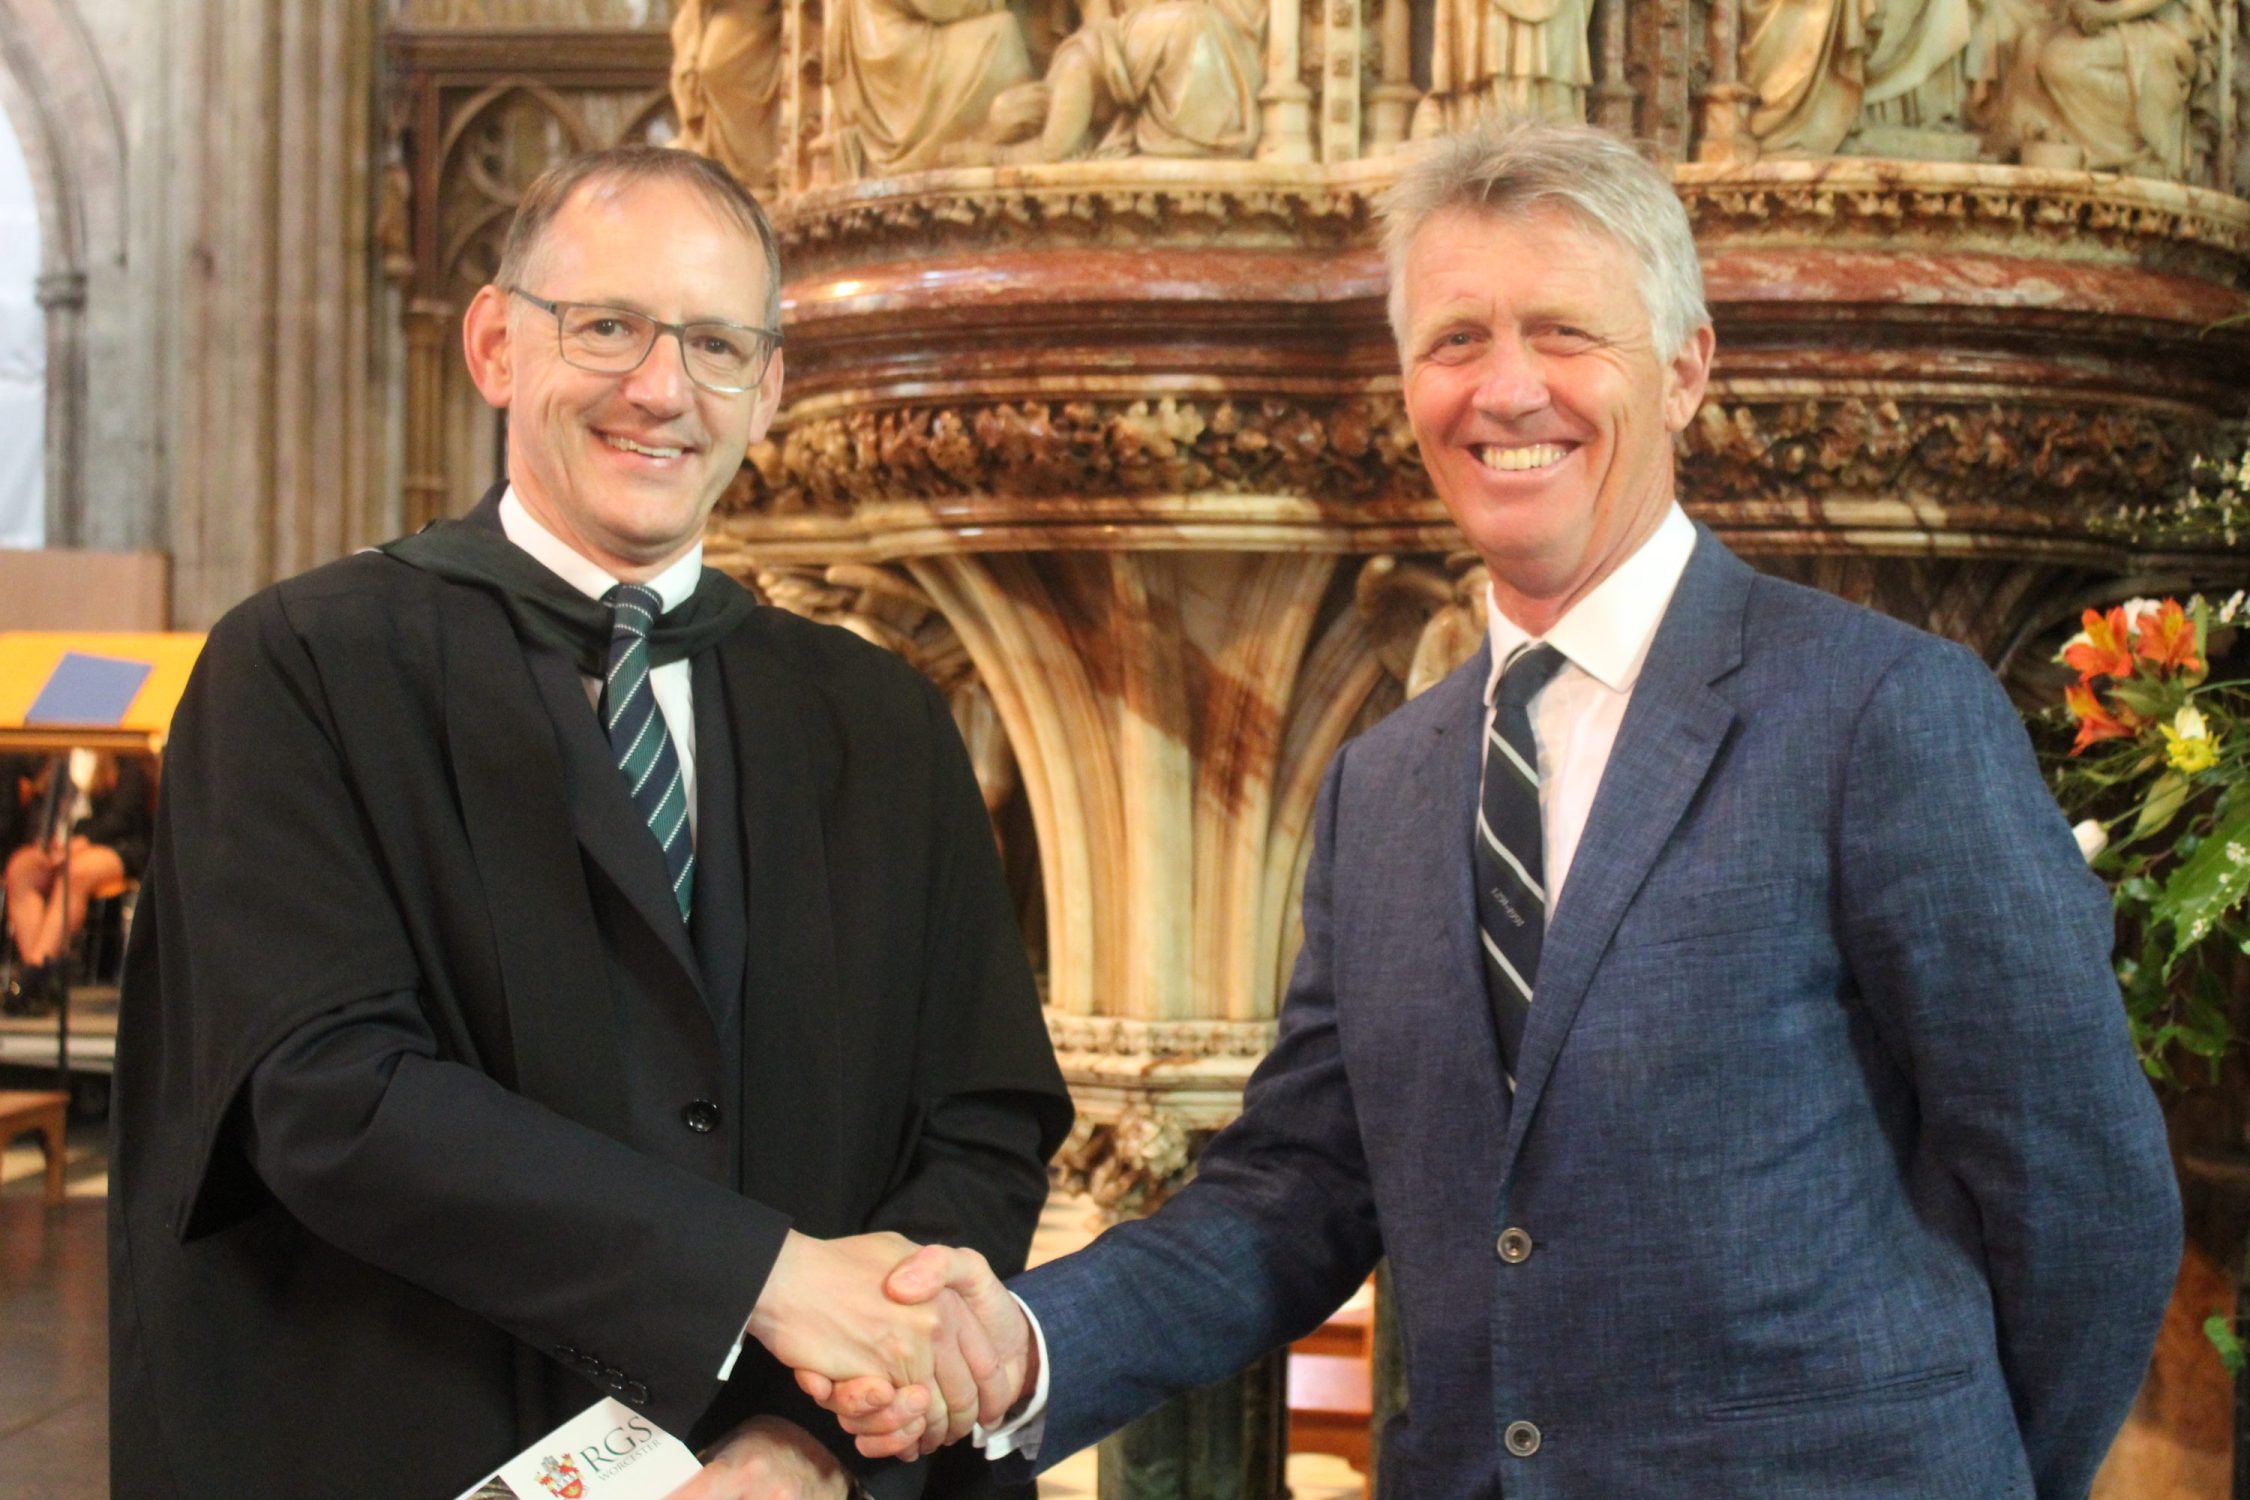 Executive Headmaster of RGS Schools', Mr John Pitt and Chair of the RGS and AOS Foundation, Mr Tim Curtis